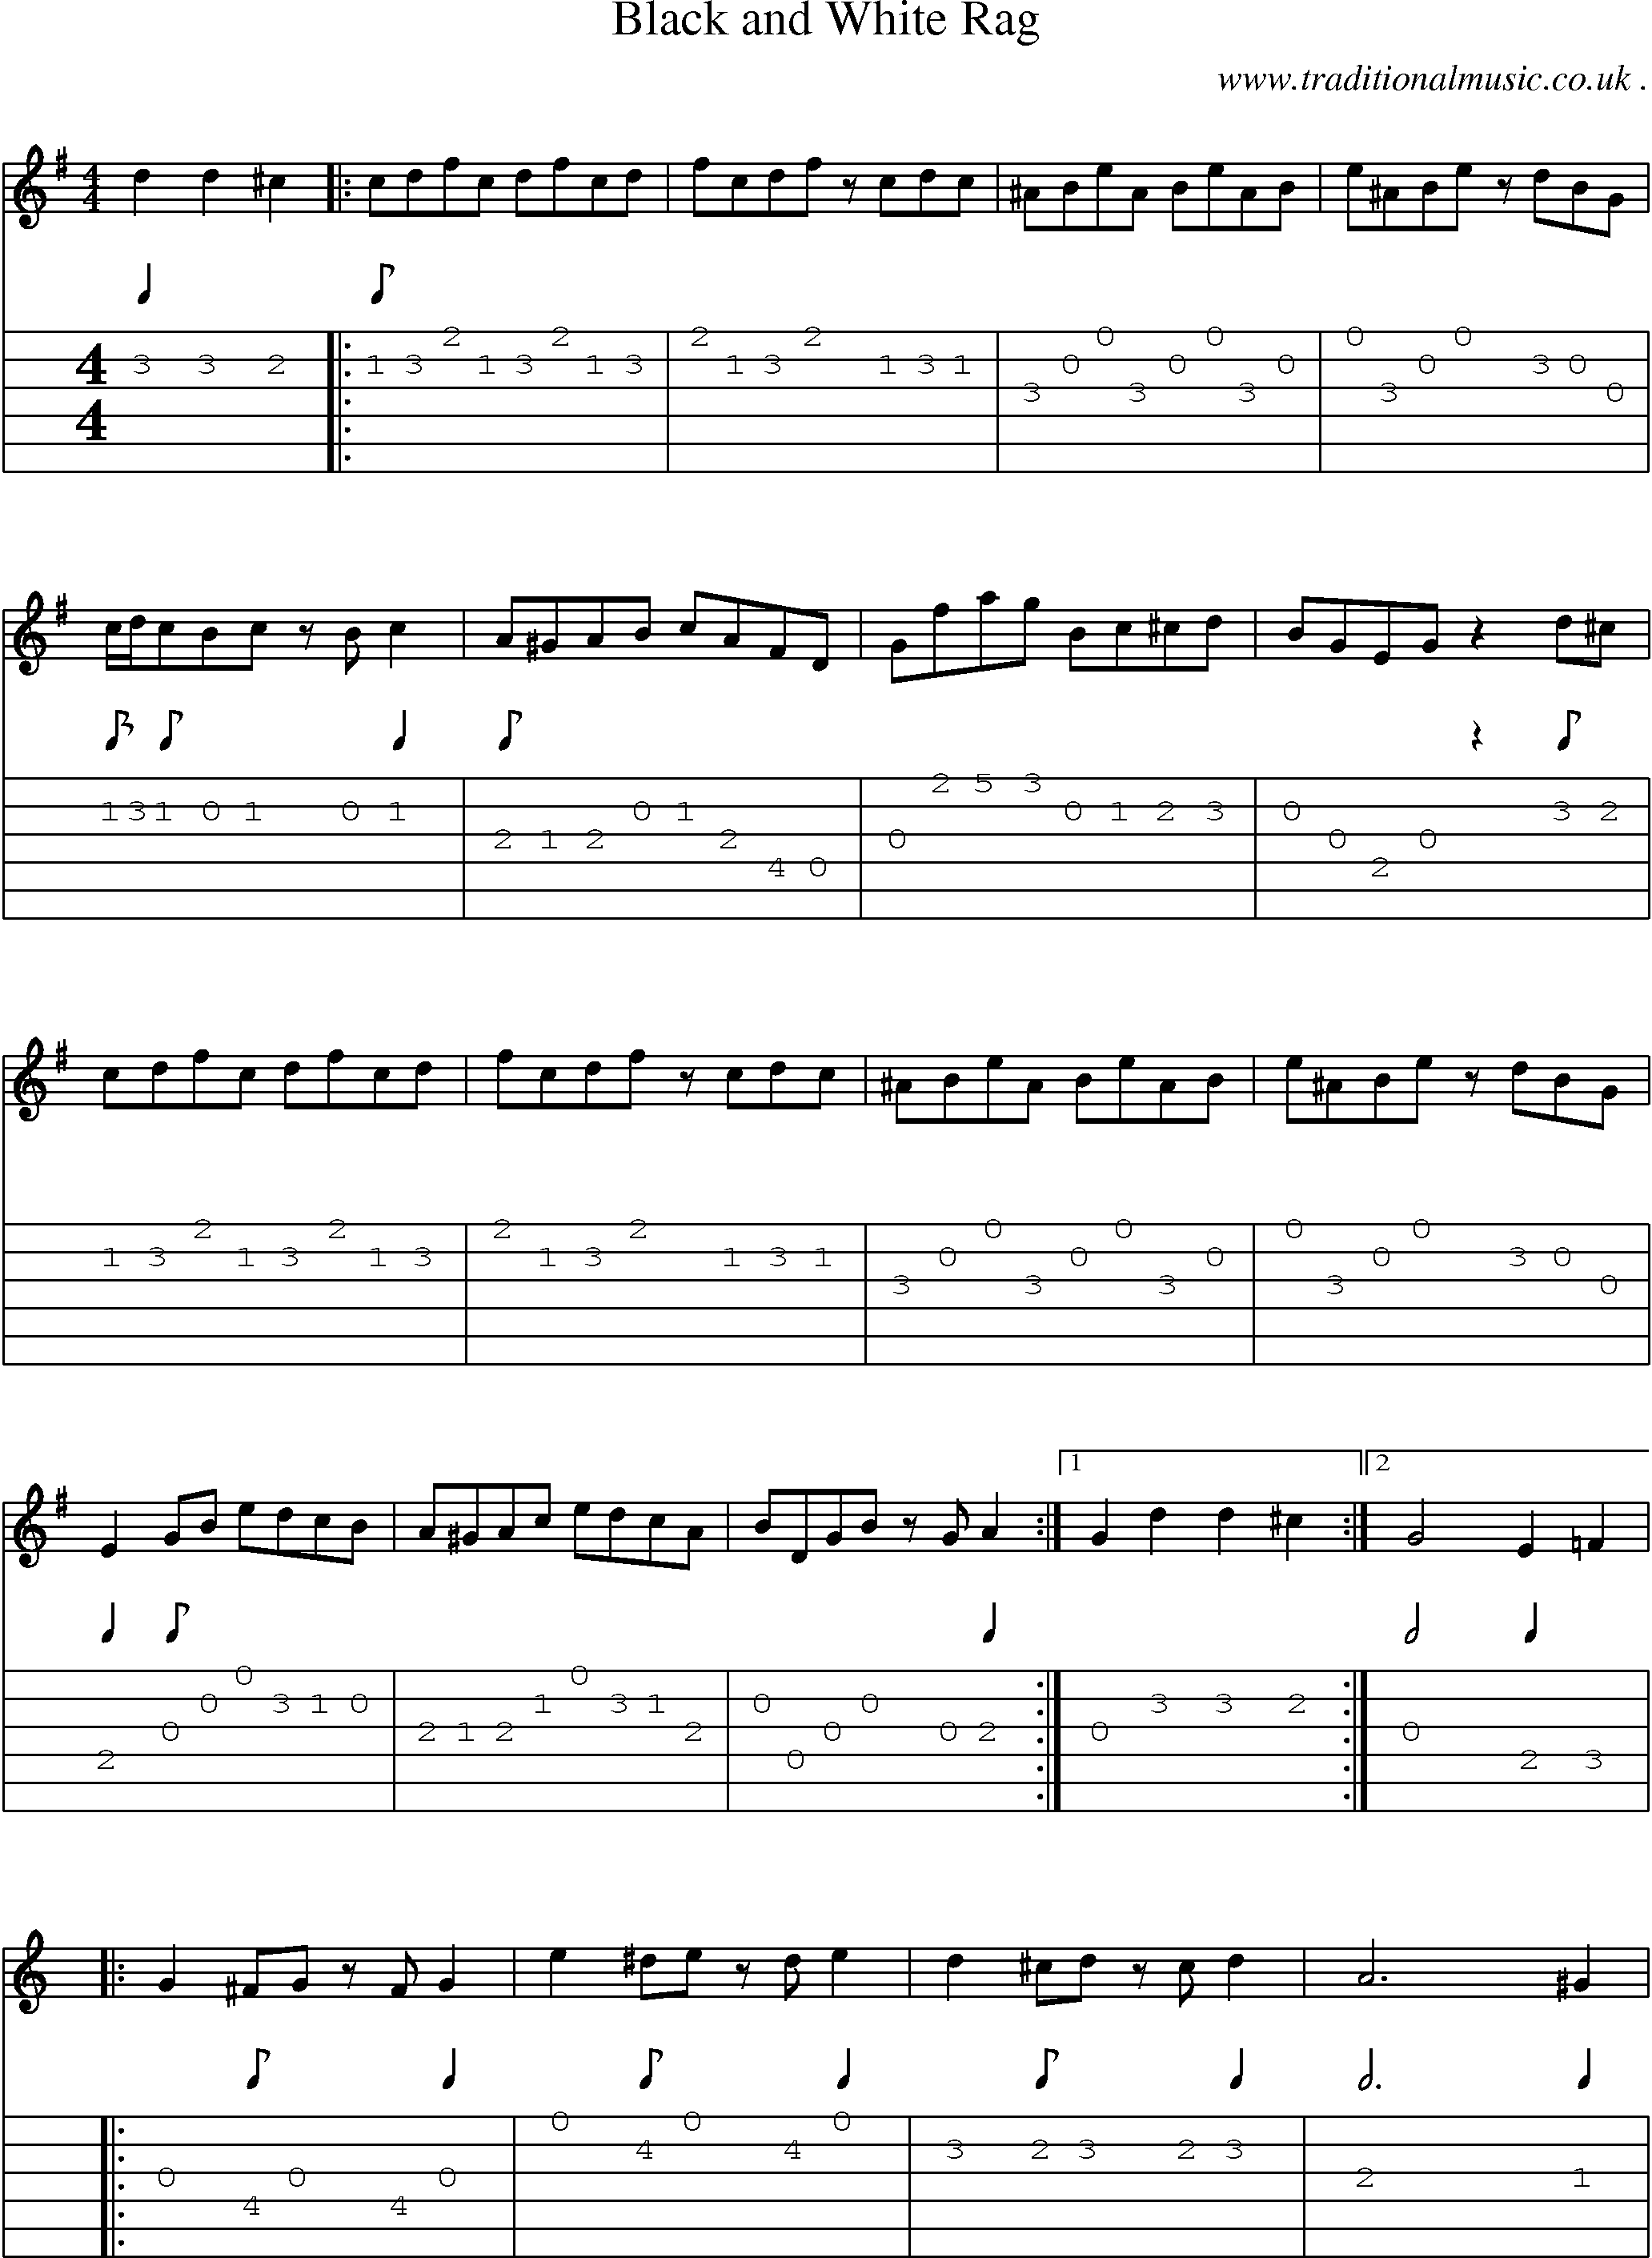 Music Score and Guitar Tabs for Black And White Rag